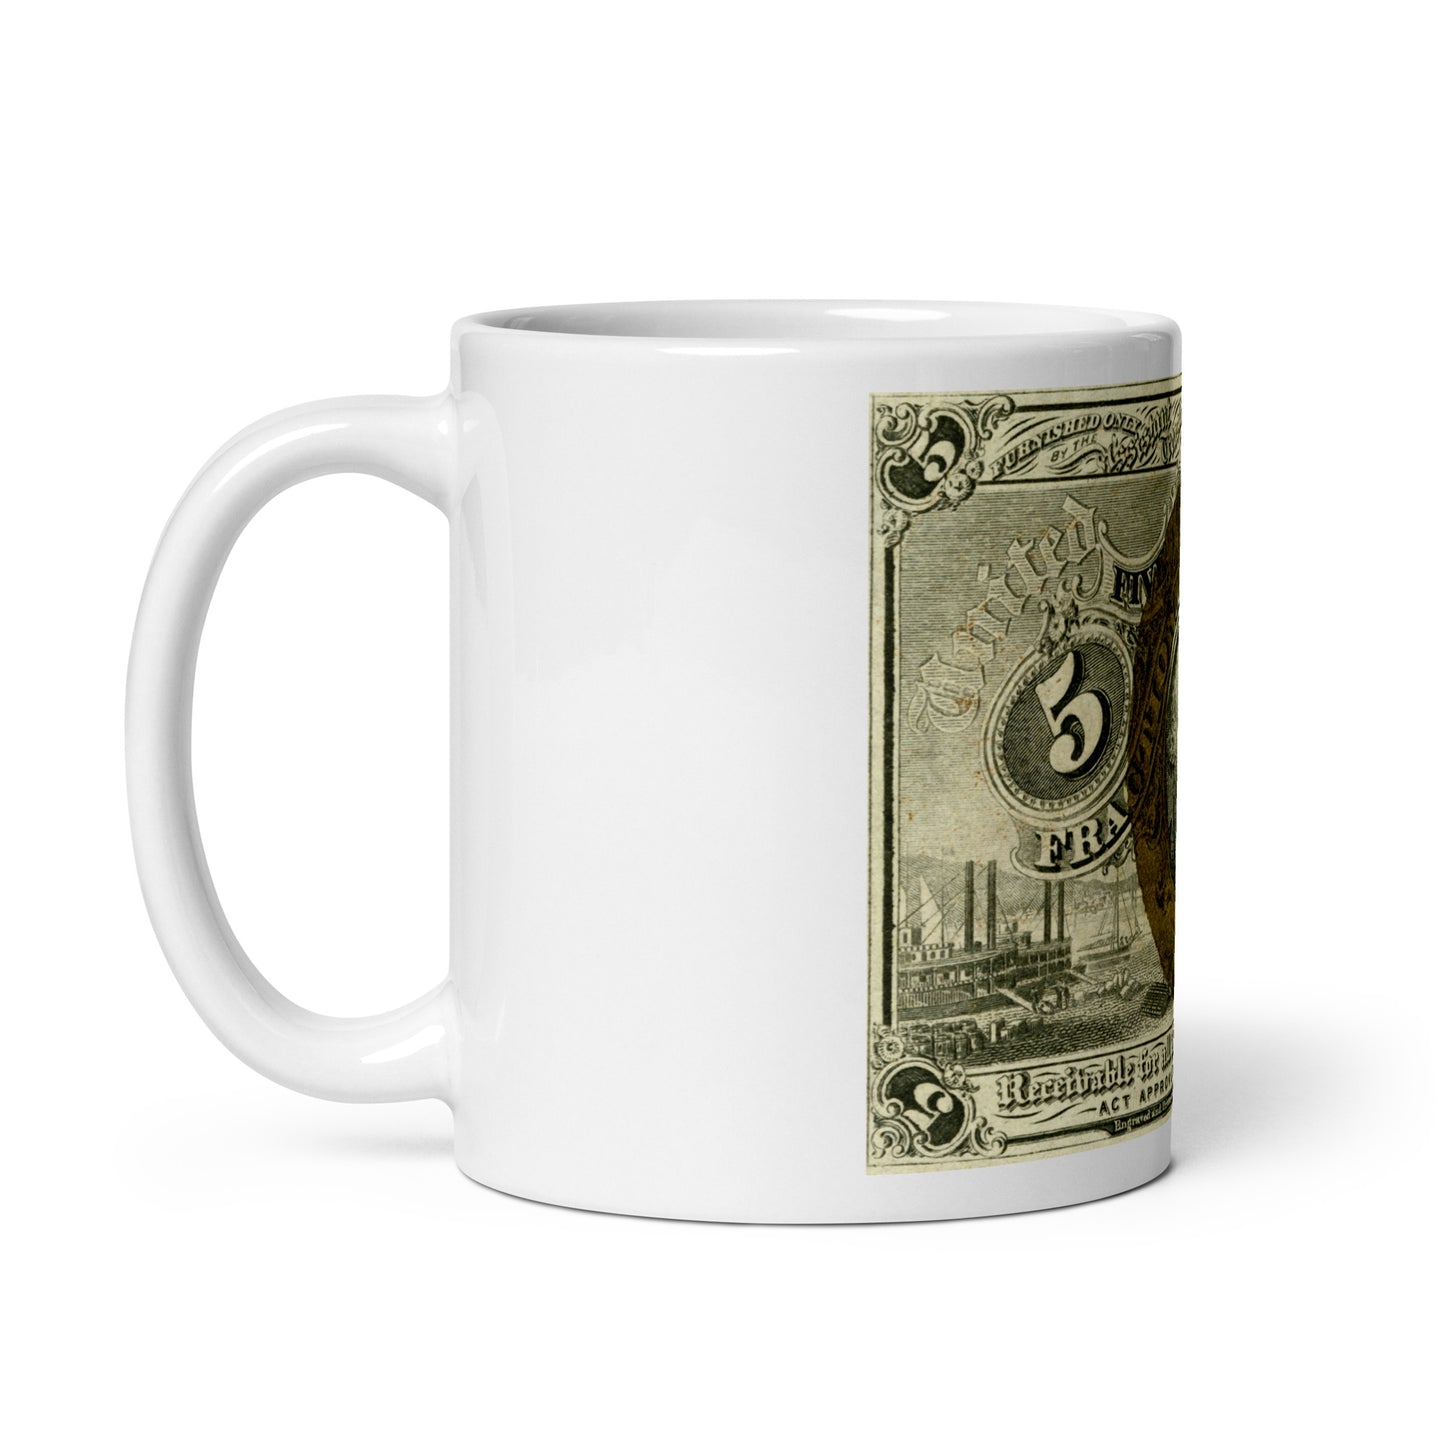 5 Cents 2ND Issue Fractional Currency Edition - Classic Currency Collector's Mug